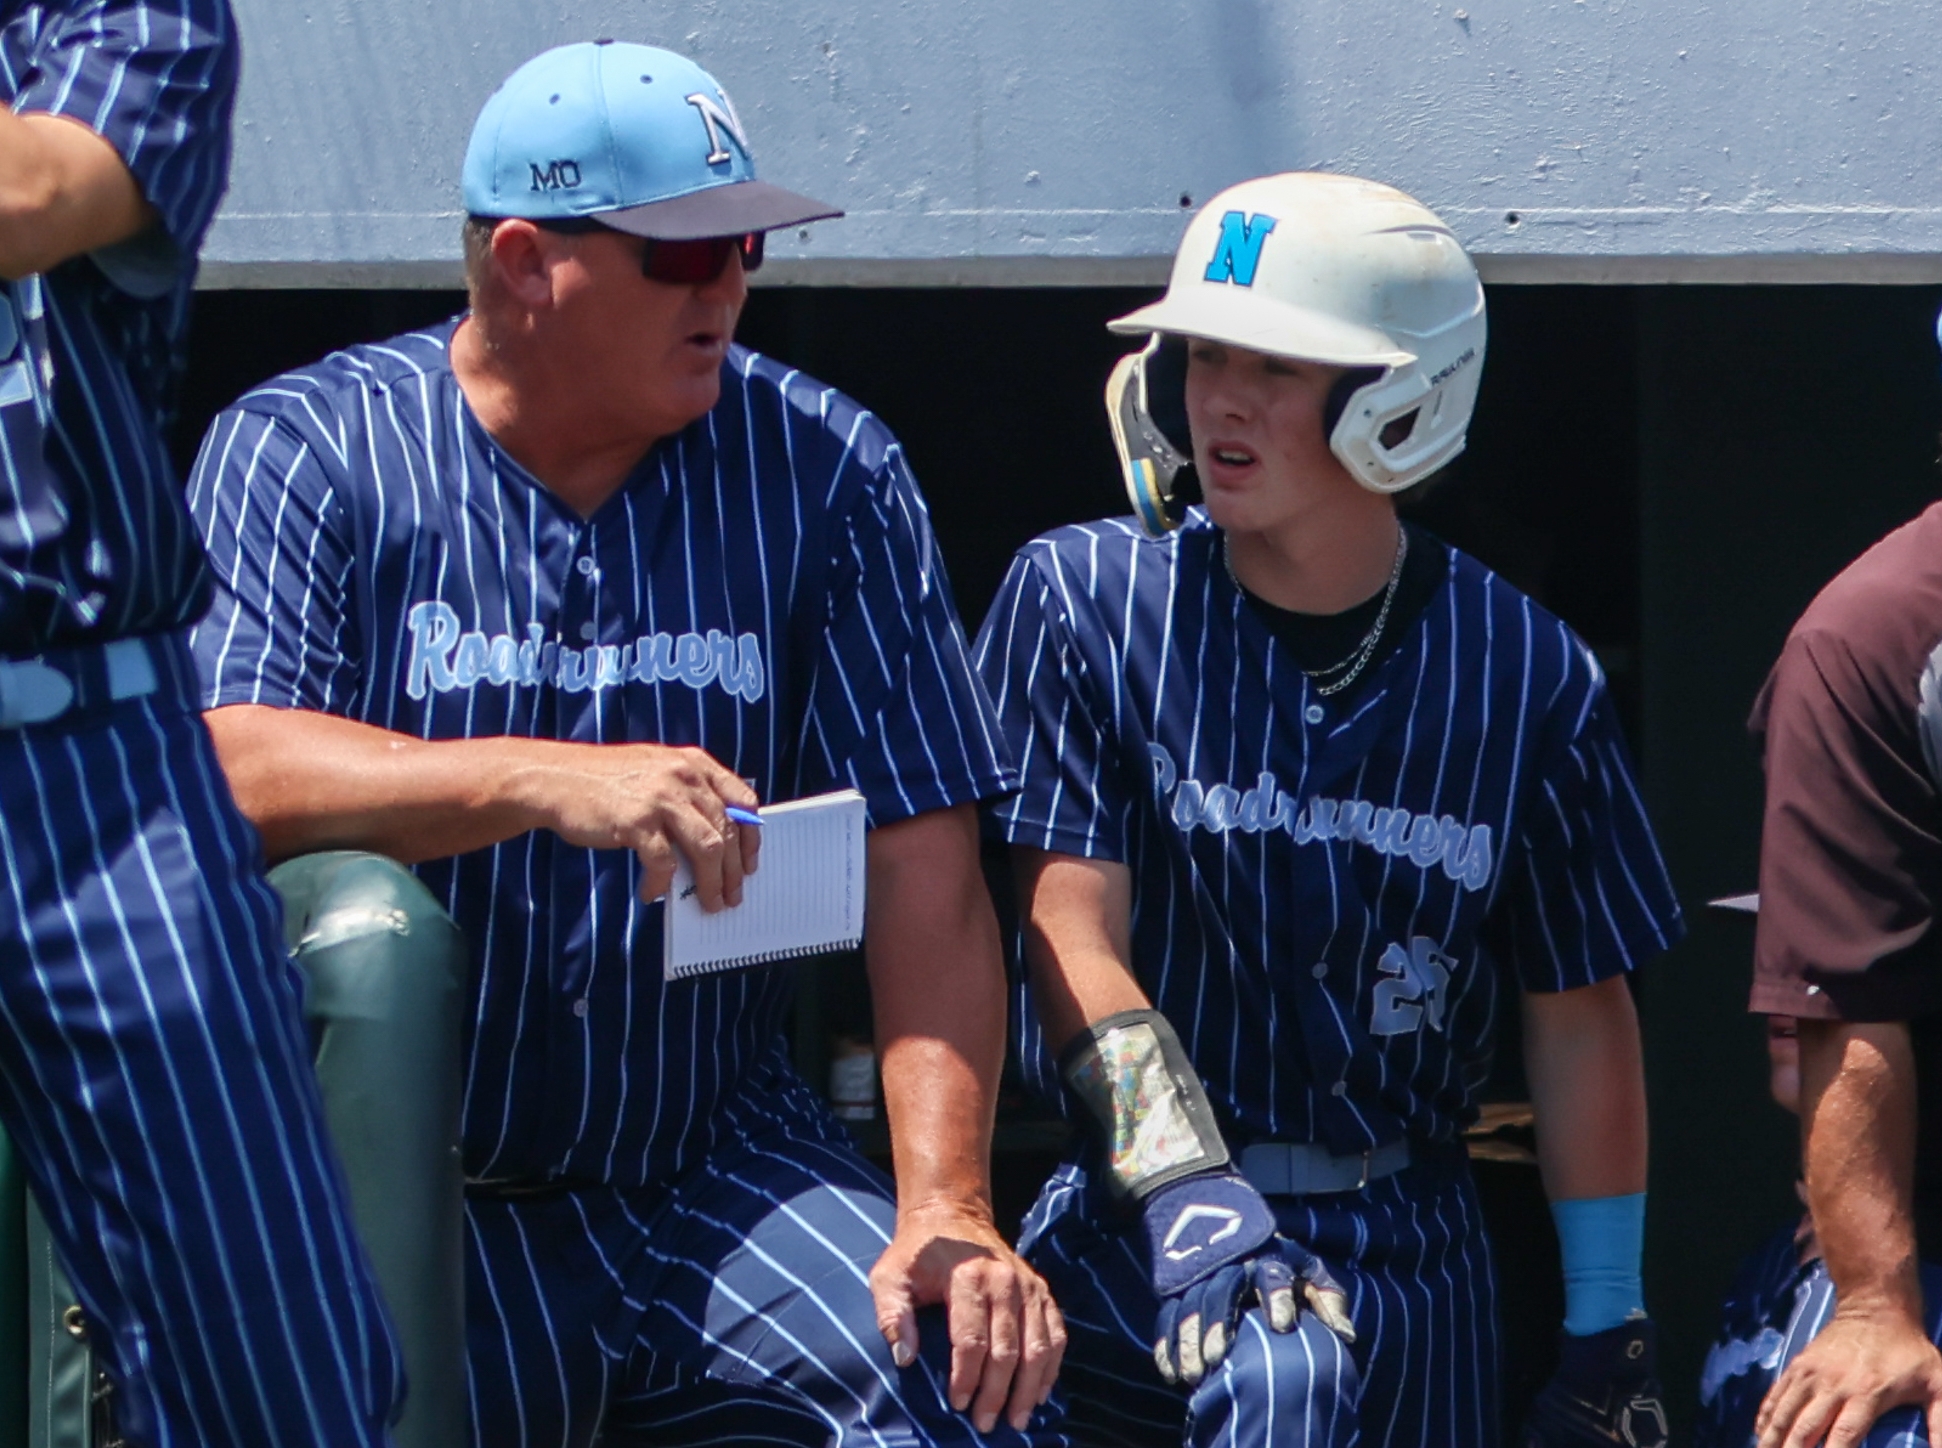 Nazareth's Landon Thome wins state title with dad, Jim Thome